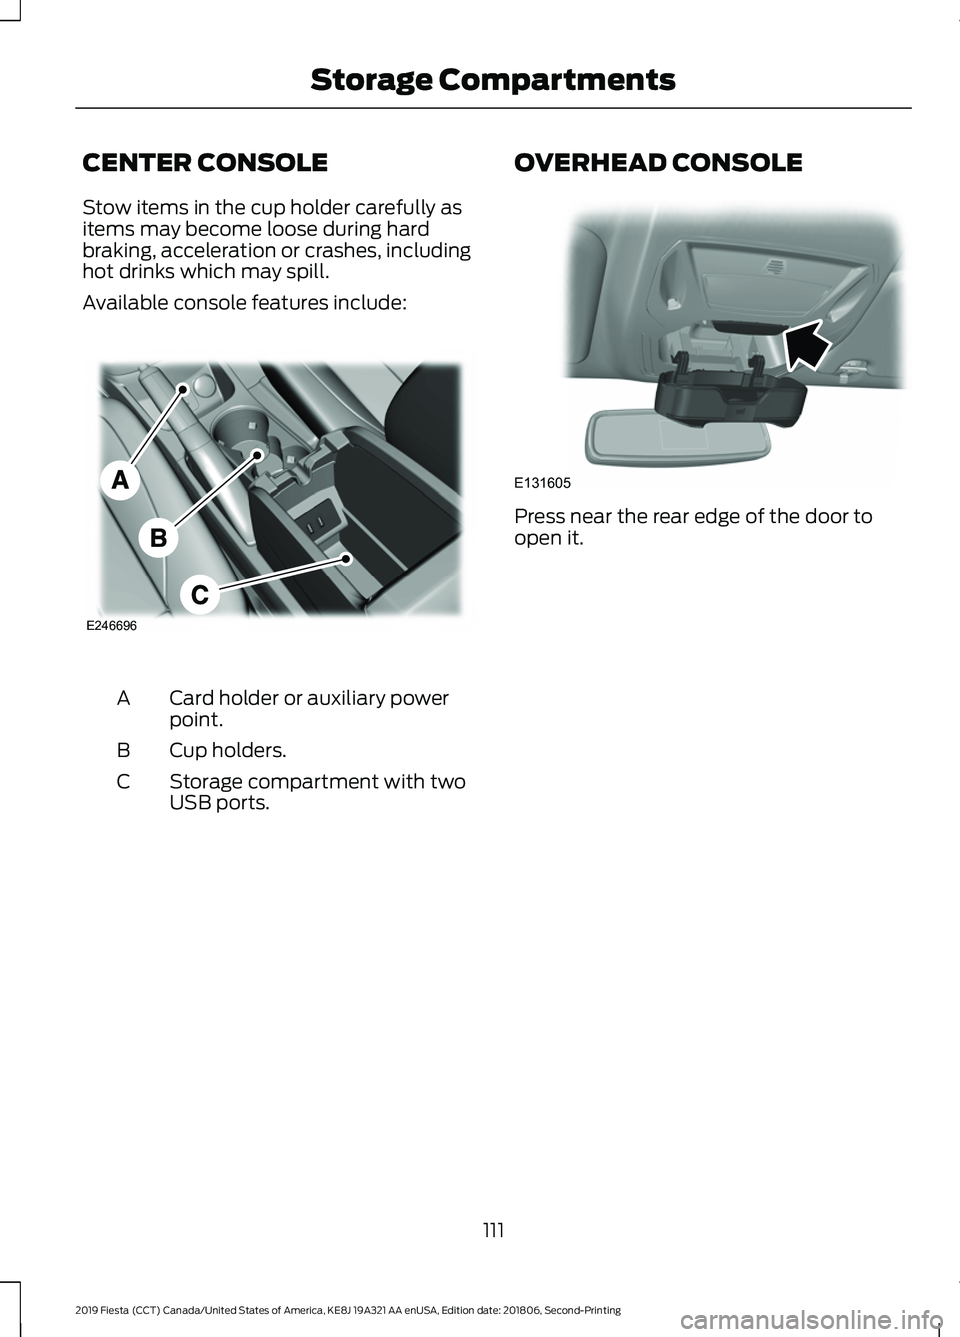 FORD FIESTA 2019  Owners Manual CENTER CONSOLE
Stow items in the cup holder carefully as
items may become loose during hard
braking, acceleration or crashes, including
hot drinks which may spill.
Available console features include:
